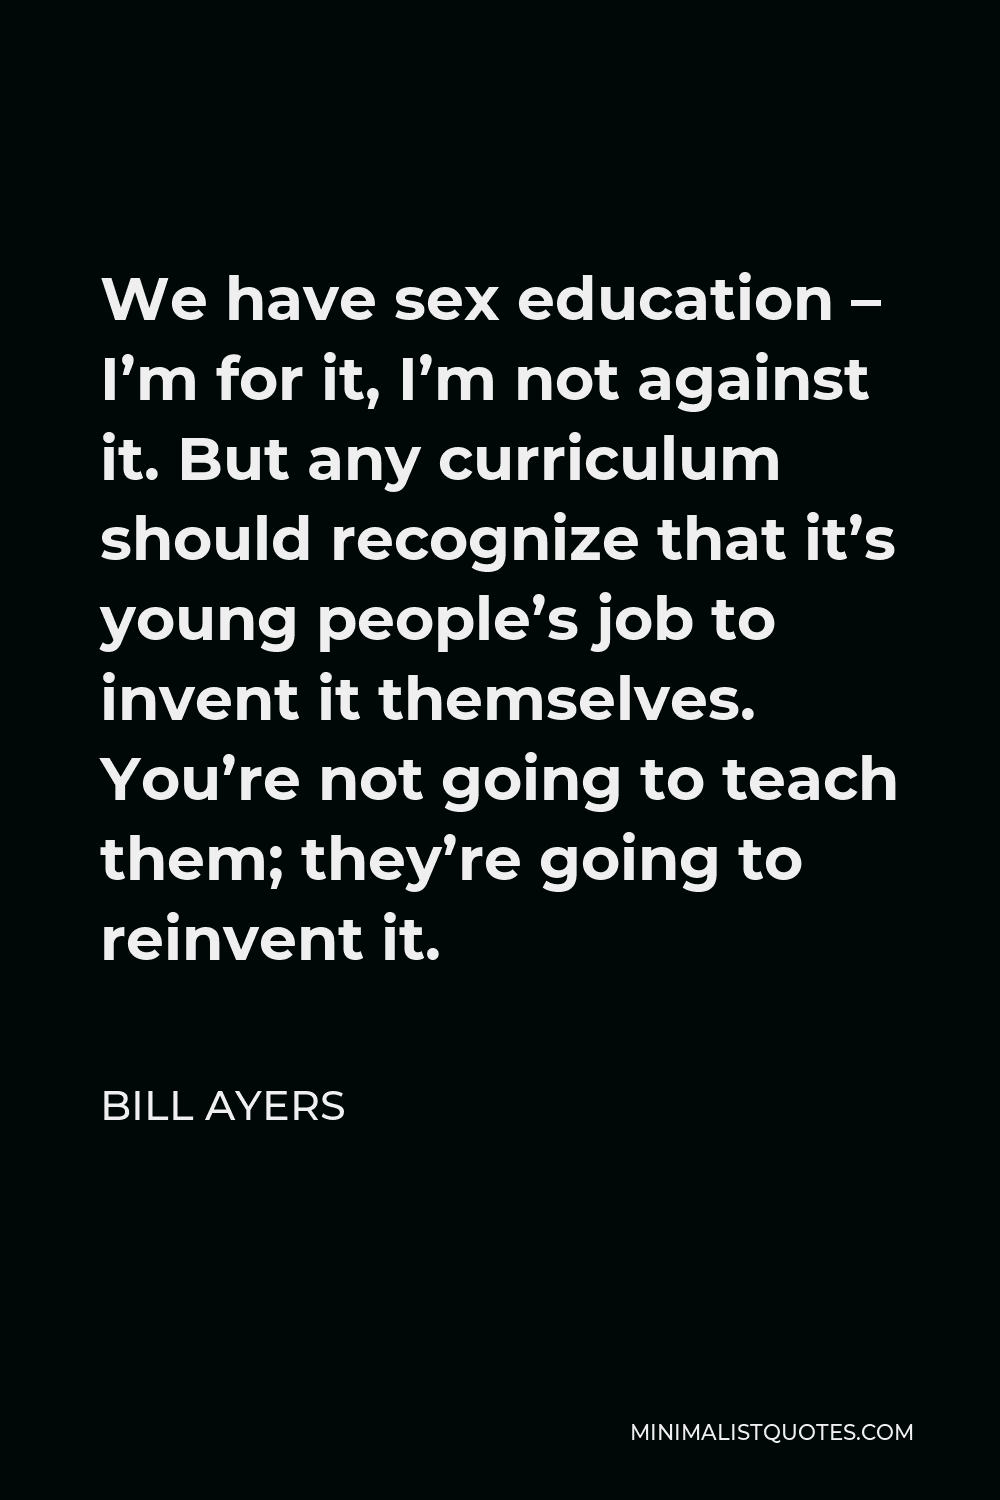 Bill Ayers Quote - We have sex education – I’m for it, I’m not against it. But any curriculum should recognize that it’s young people’s job to invent it themselves. You’re not going to teach them; they’re going to reinvent it.